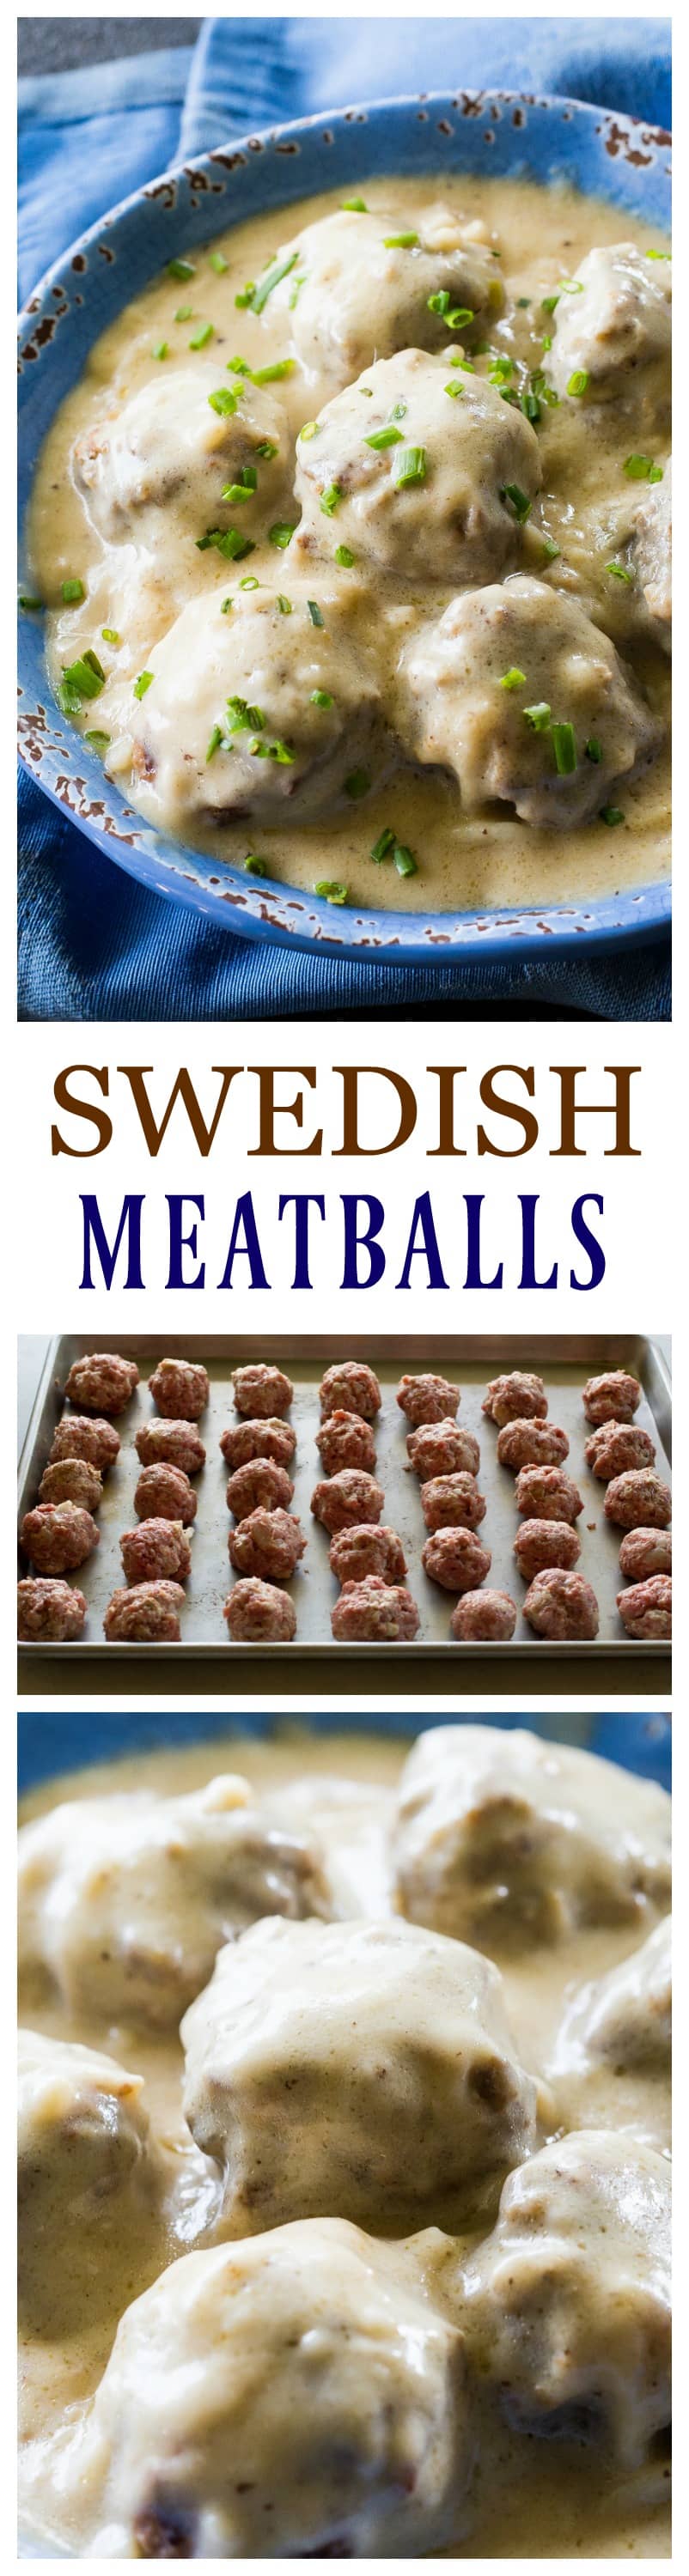 Swedish Meatballs - so tender with a flavorful gravy. Serve over noodles or rice. #swedish #meatballs #recipe #ikea